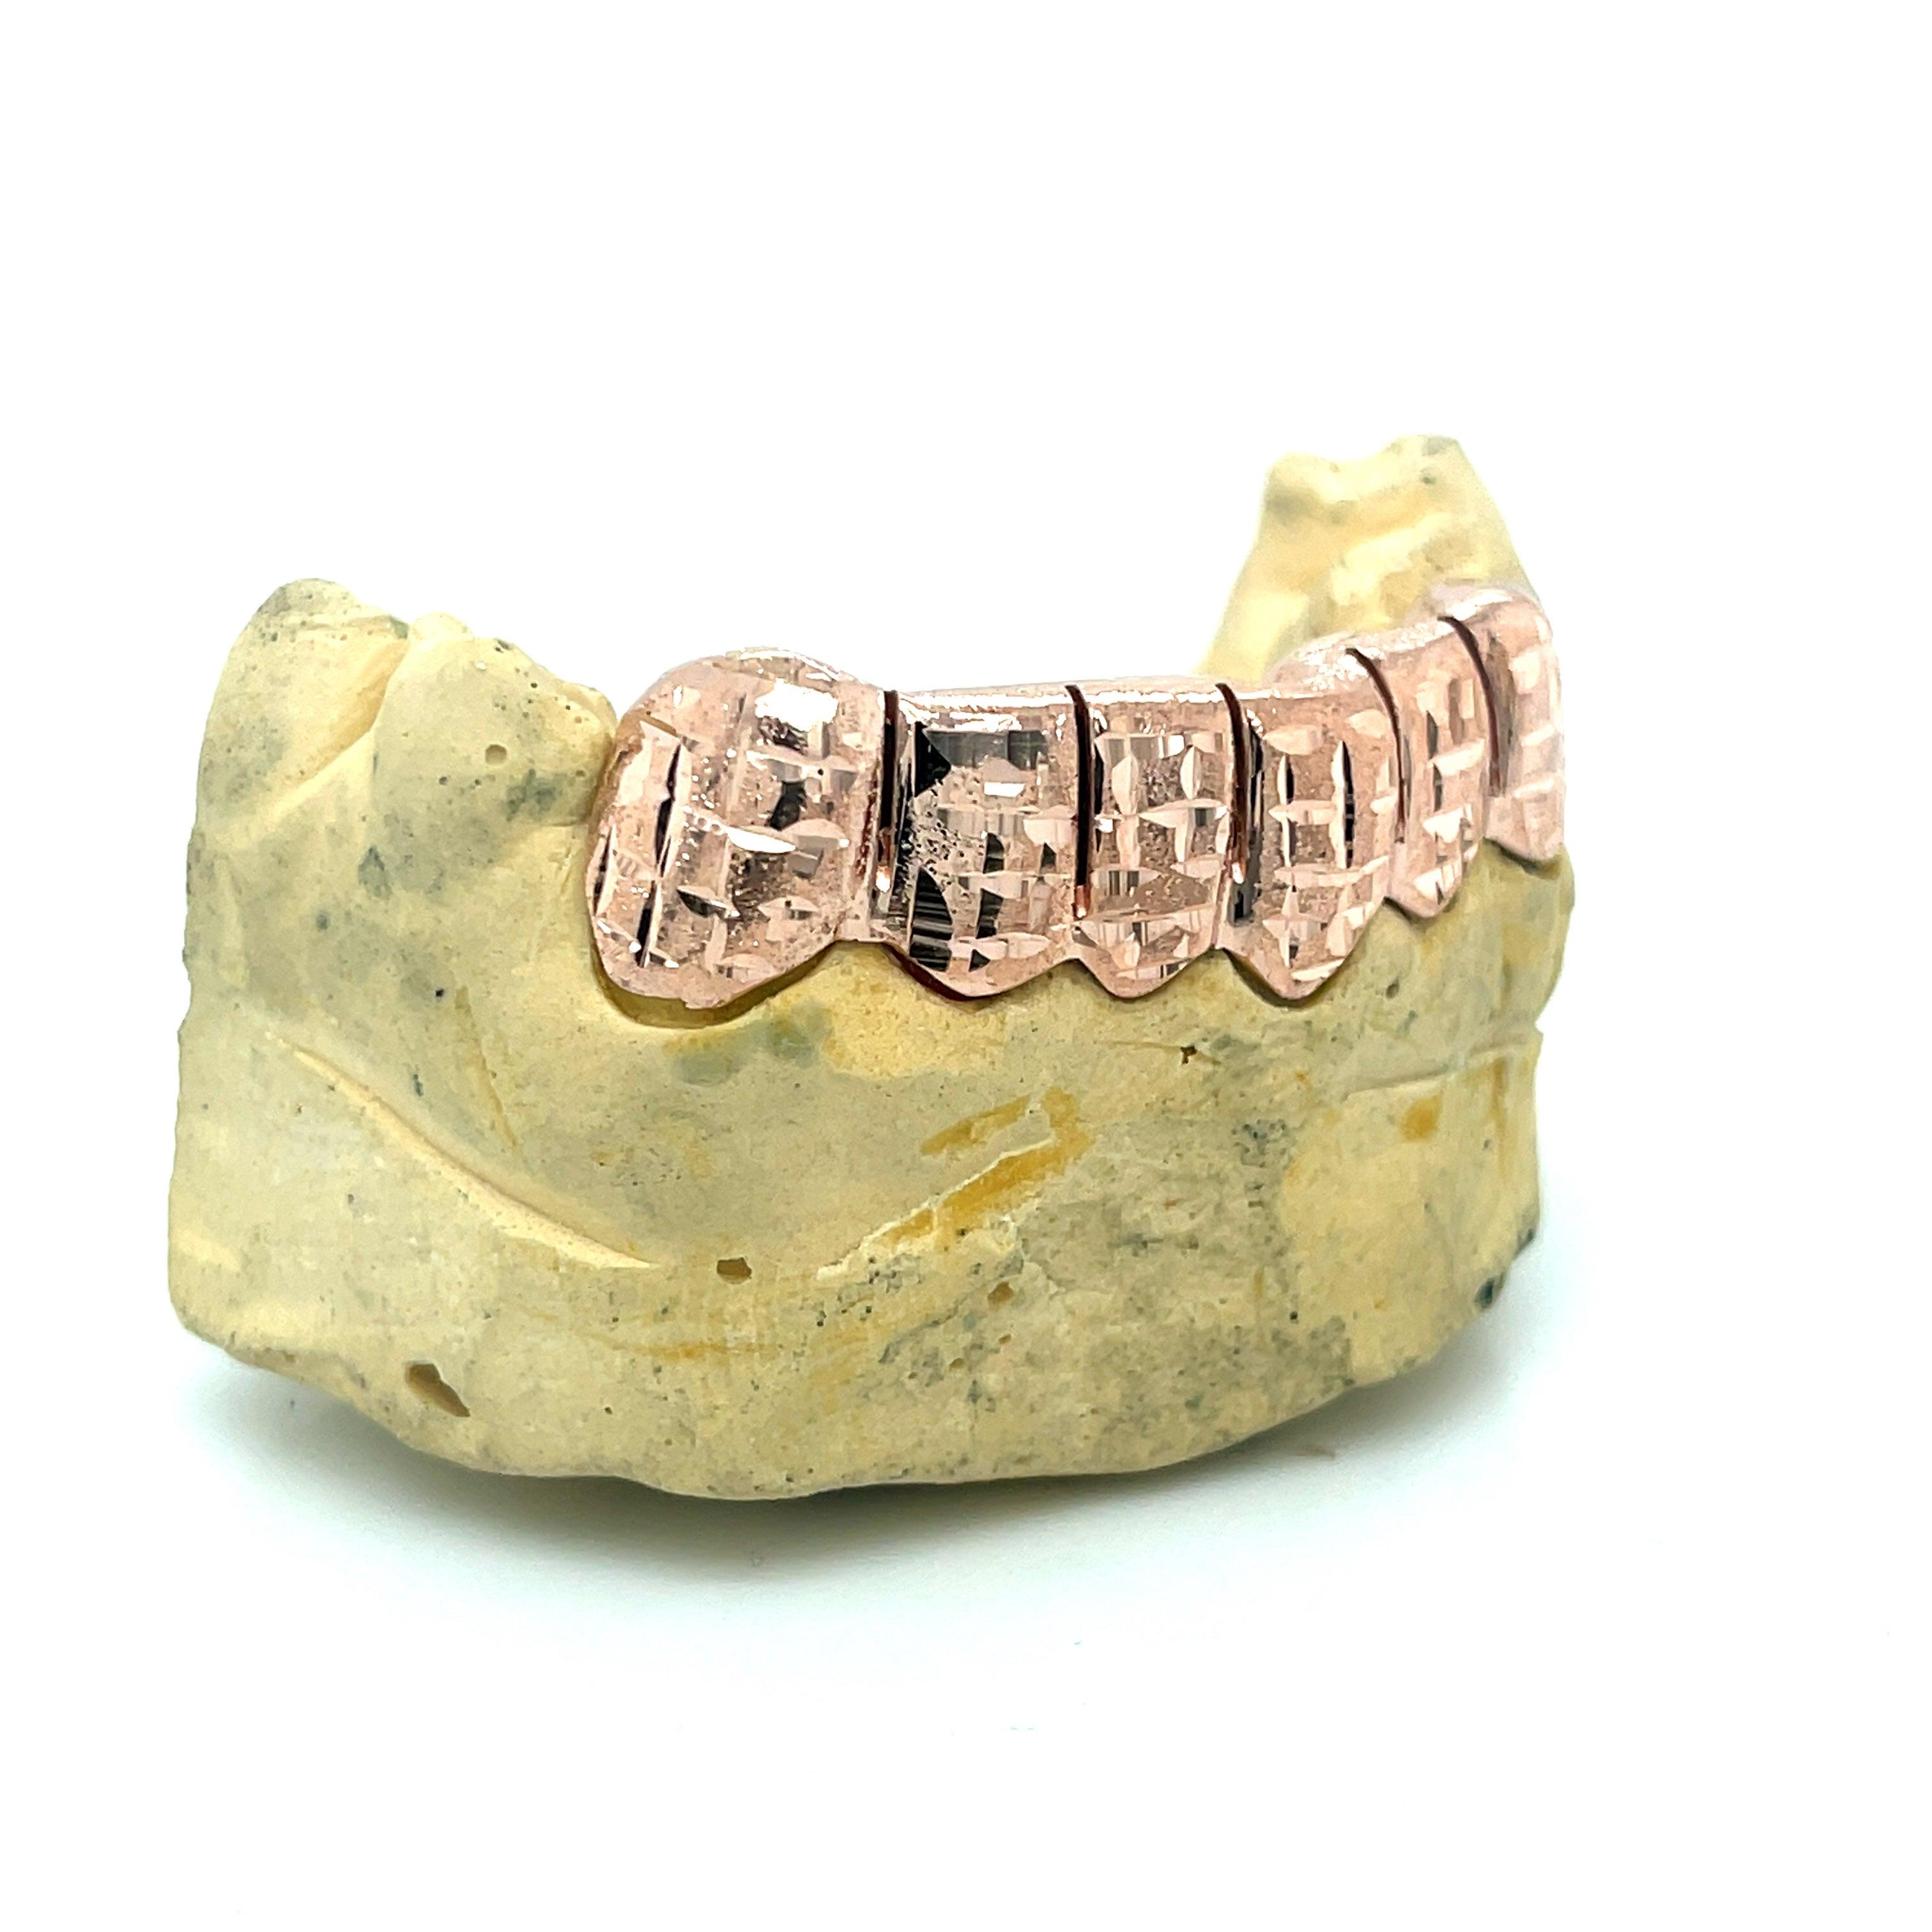 6pc Rose Gold Dusted Bricks Bottom Grillz - Seattle Gold Grillz